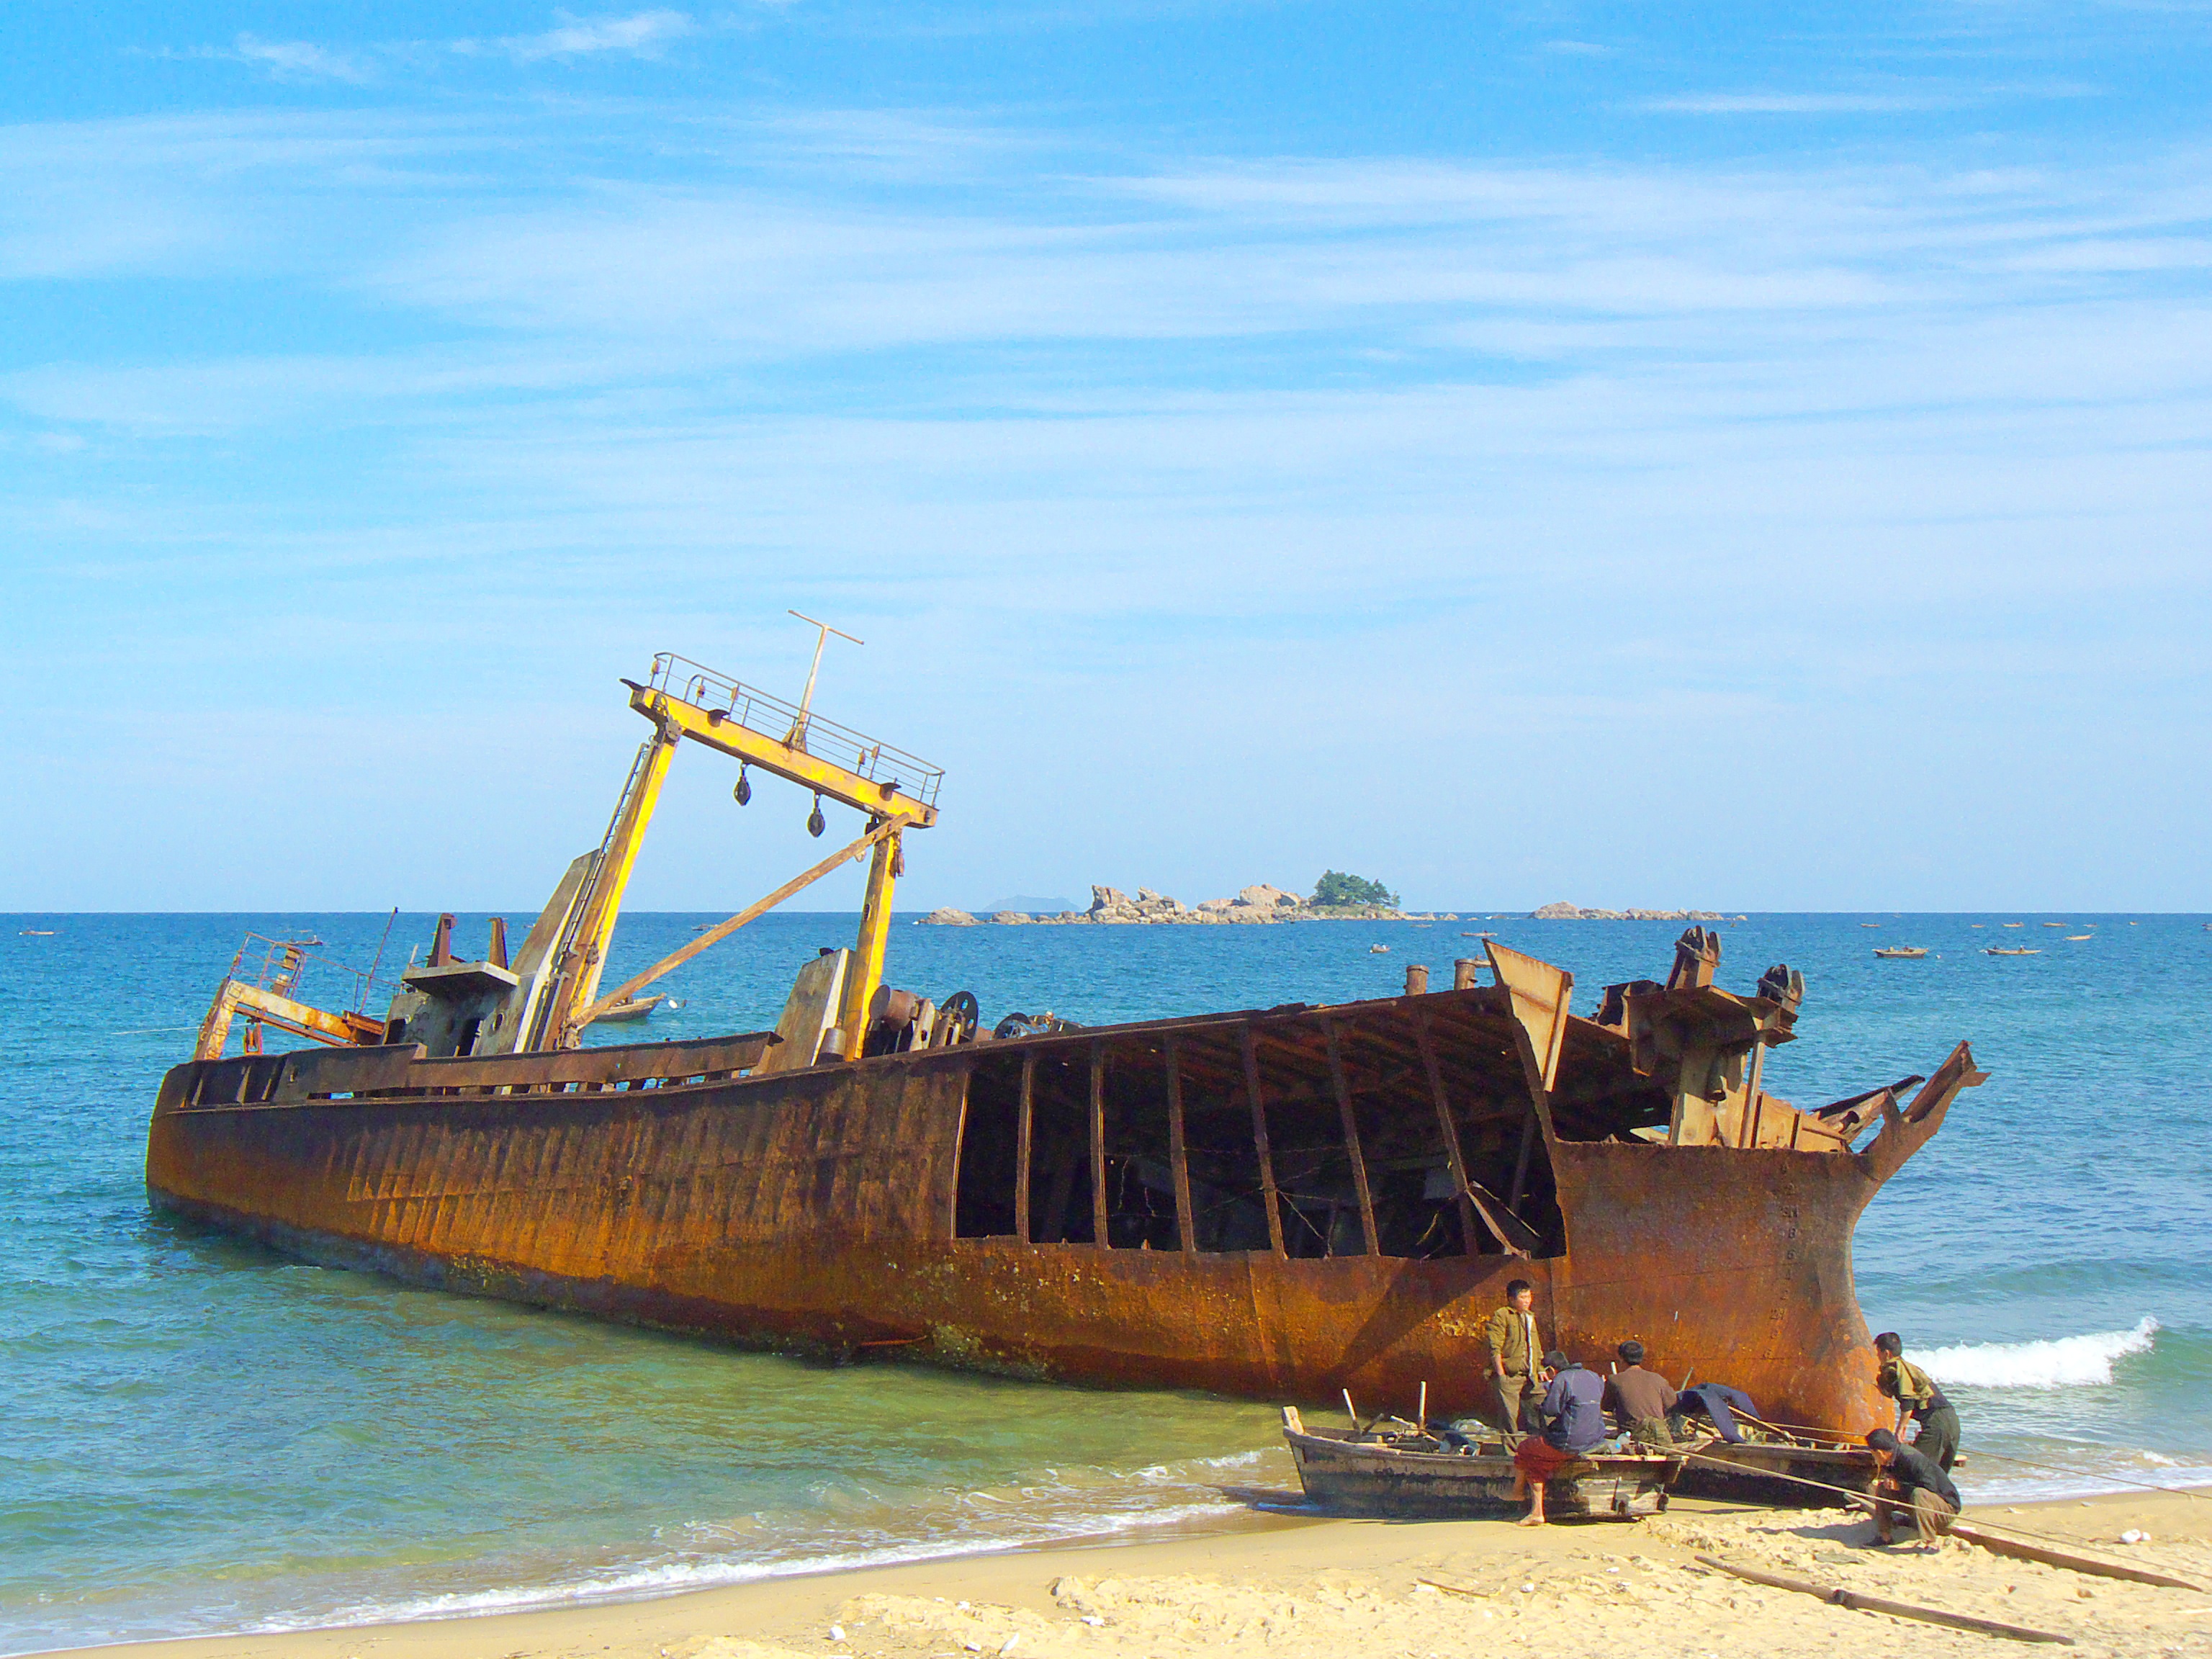 File:Shipwreck on the beach in Kangwon-do 1.jpg - Wikimedia Commons